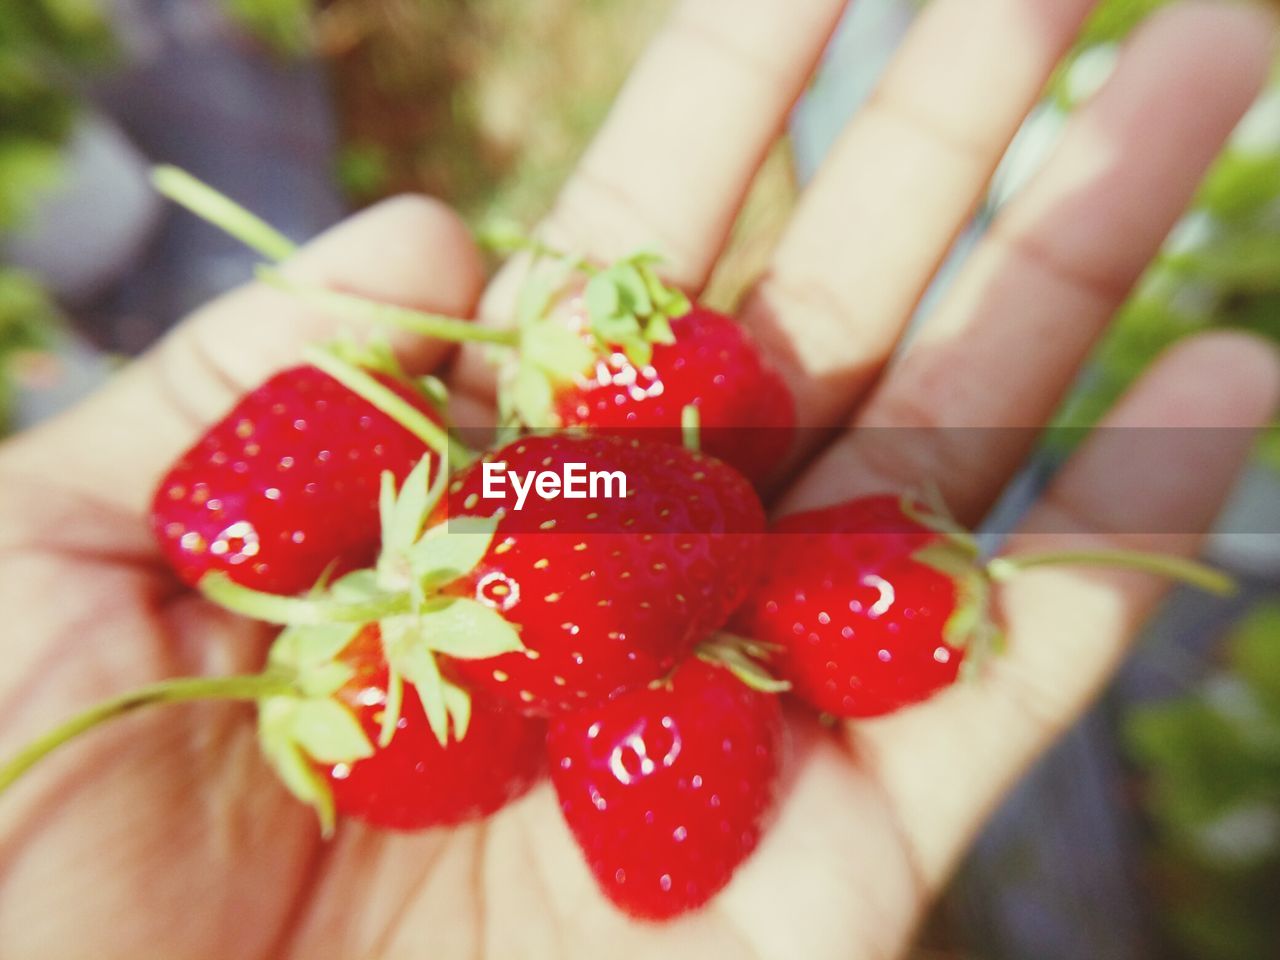 CLOSE-UP OF HAND HOLDING RED STRAWBERRIES